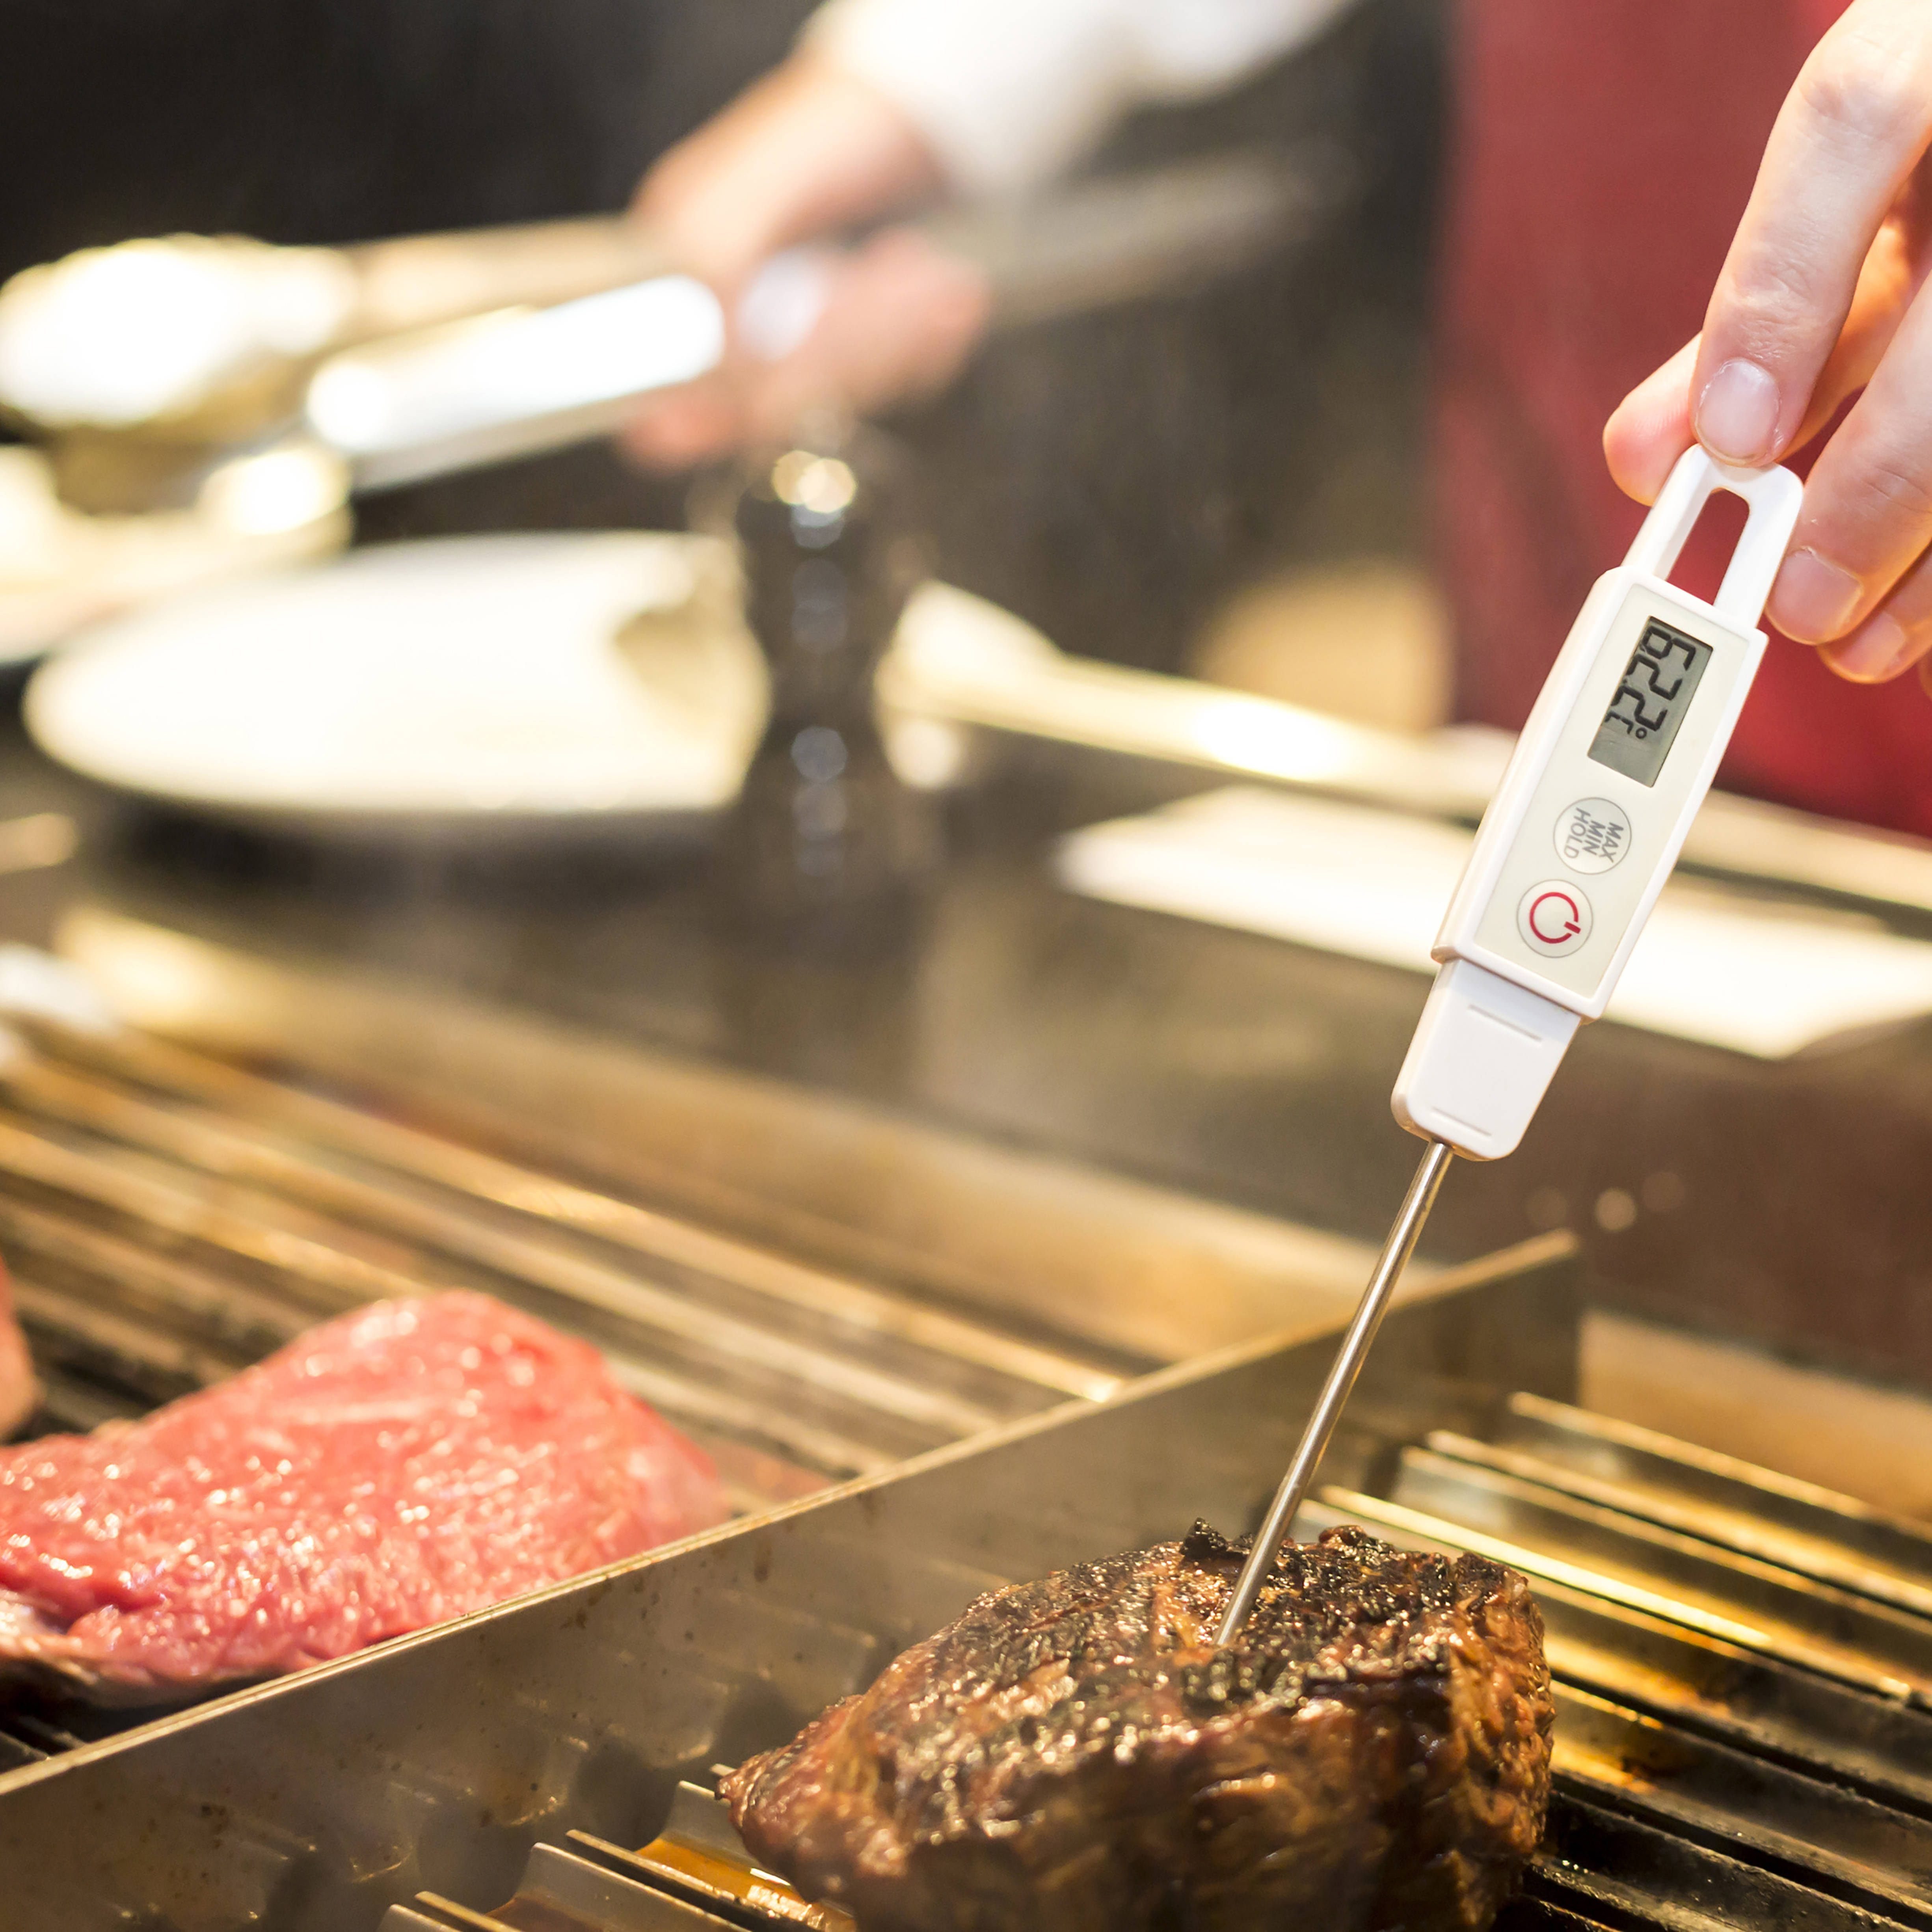 A cook checking the temperature of a filet with a digital thermometer